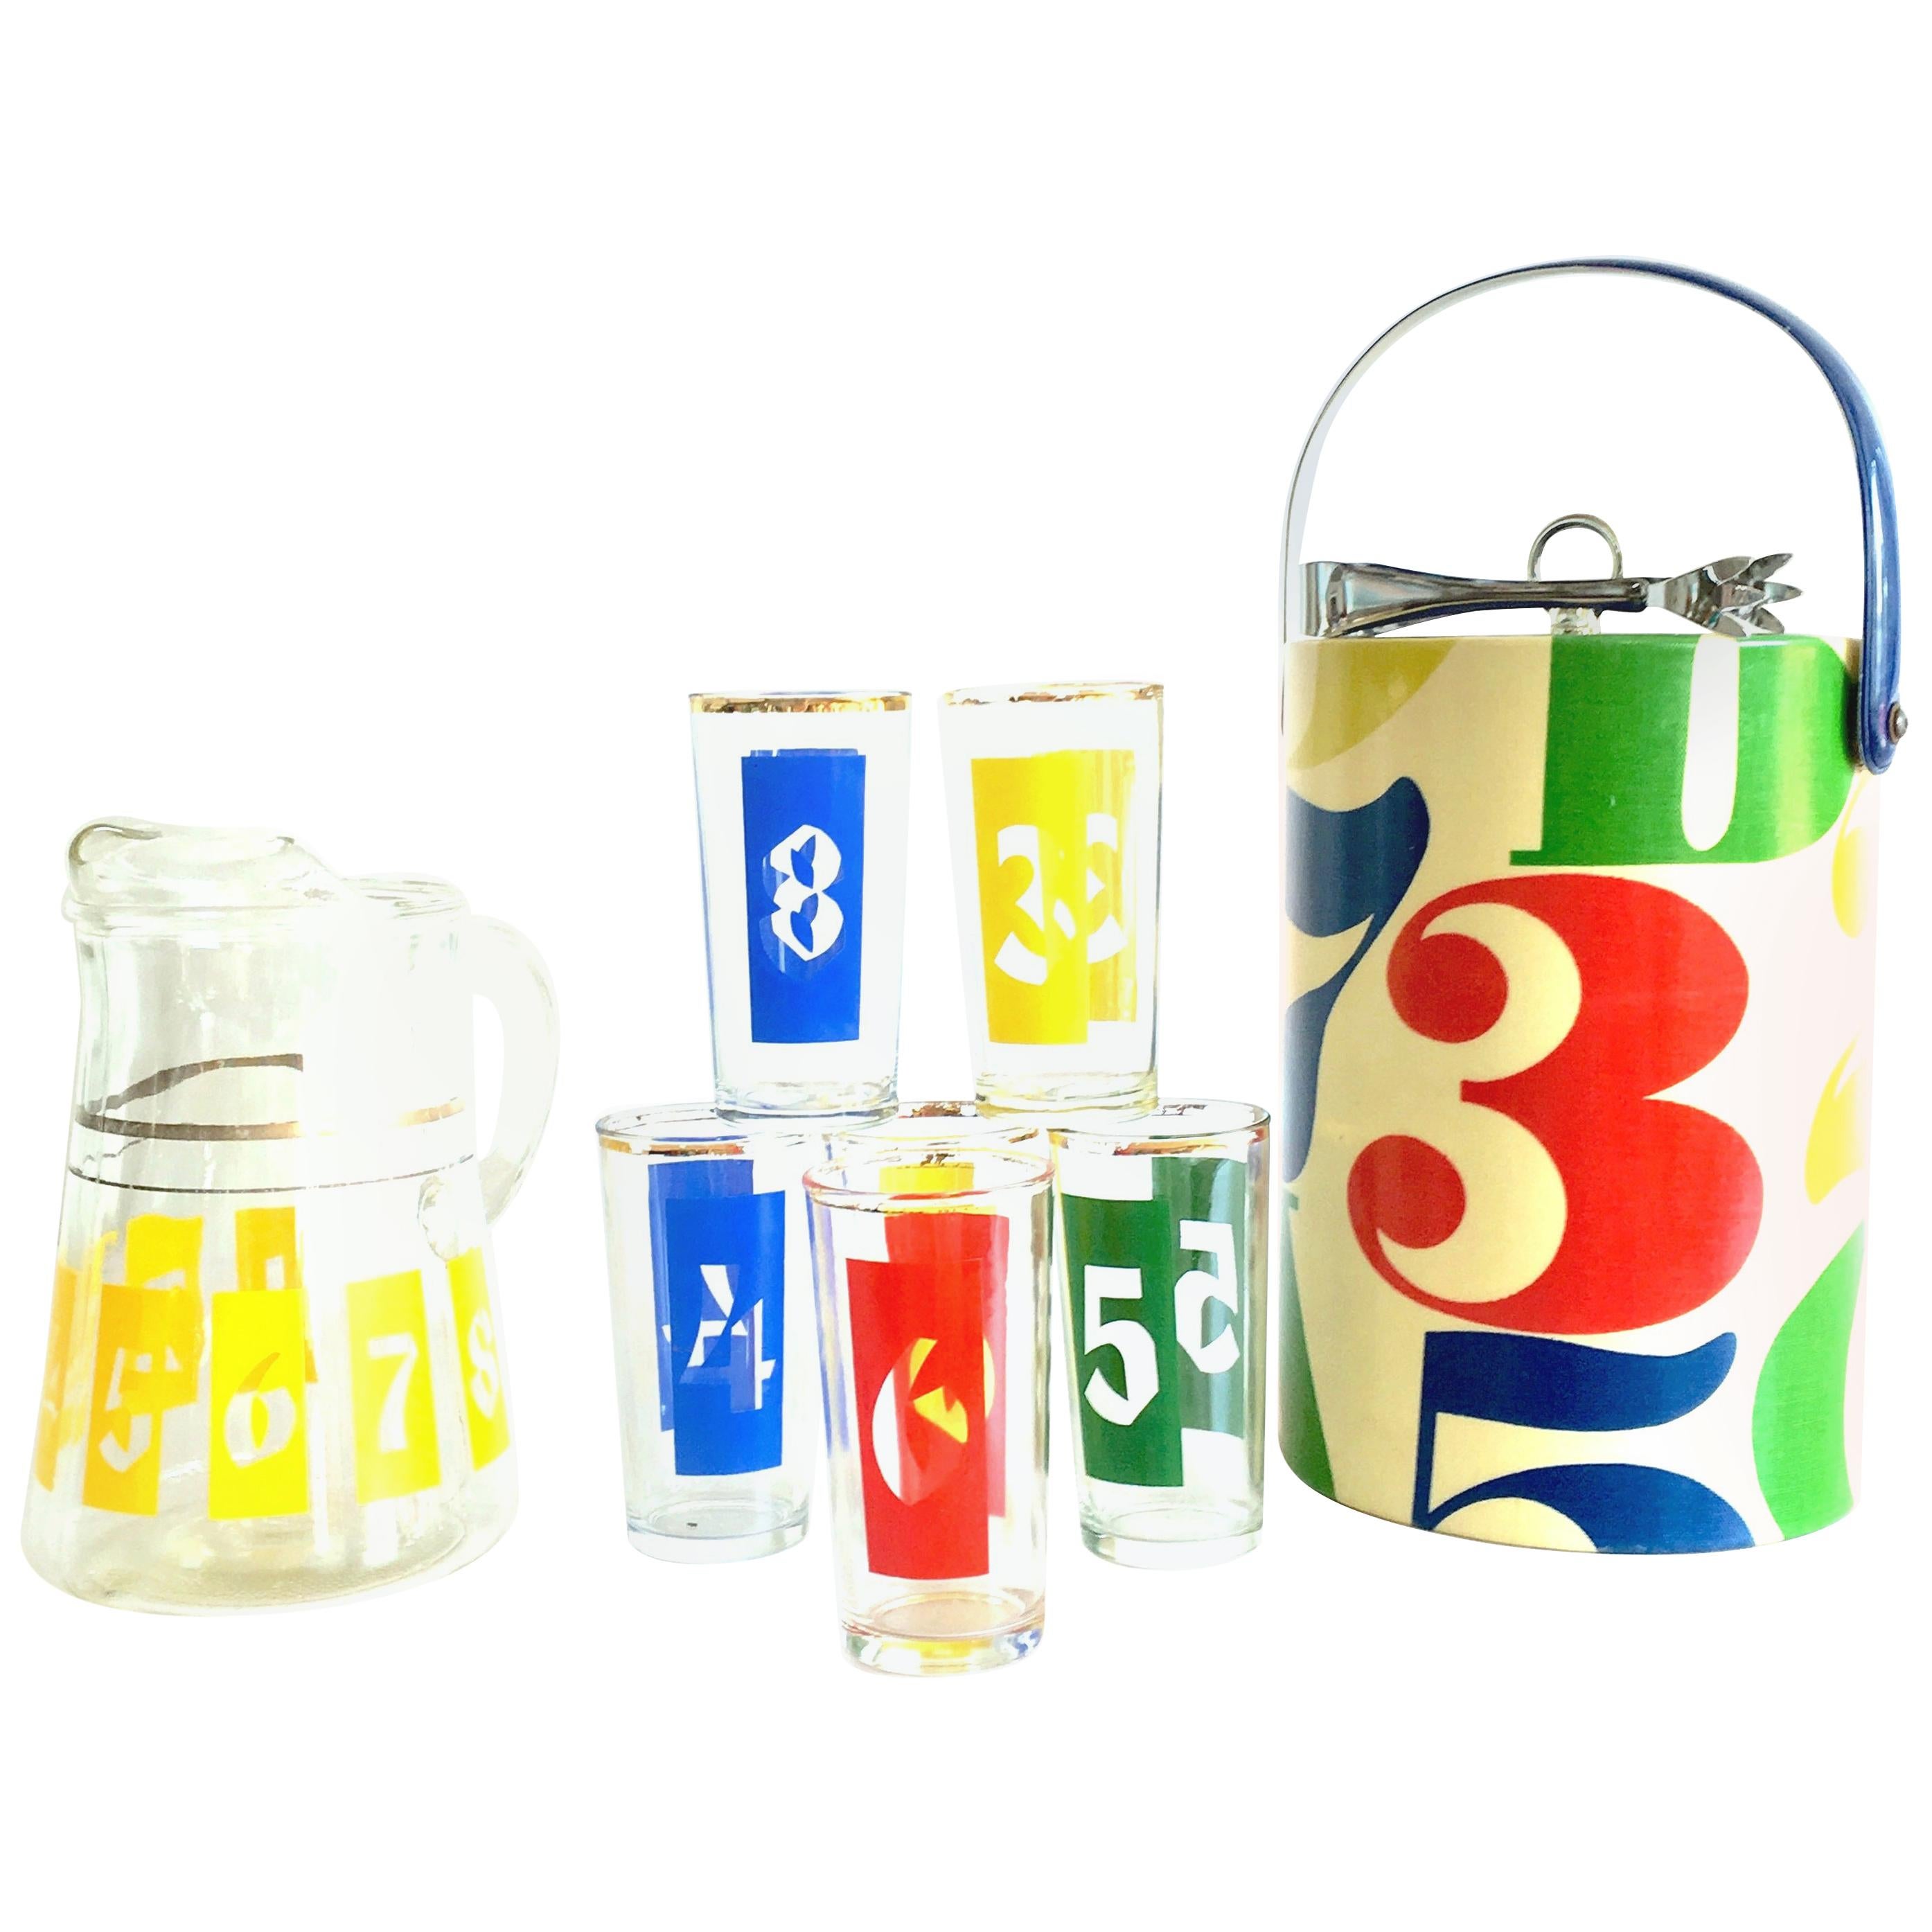 1960s Groovy Graphic "Numbers" Printed Glass Bar Set of 10